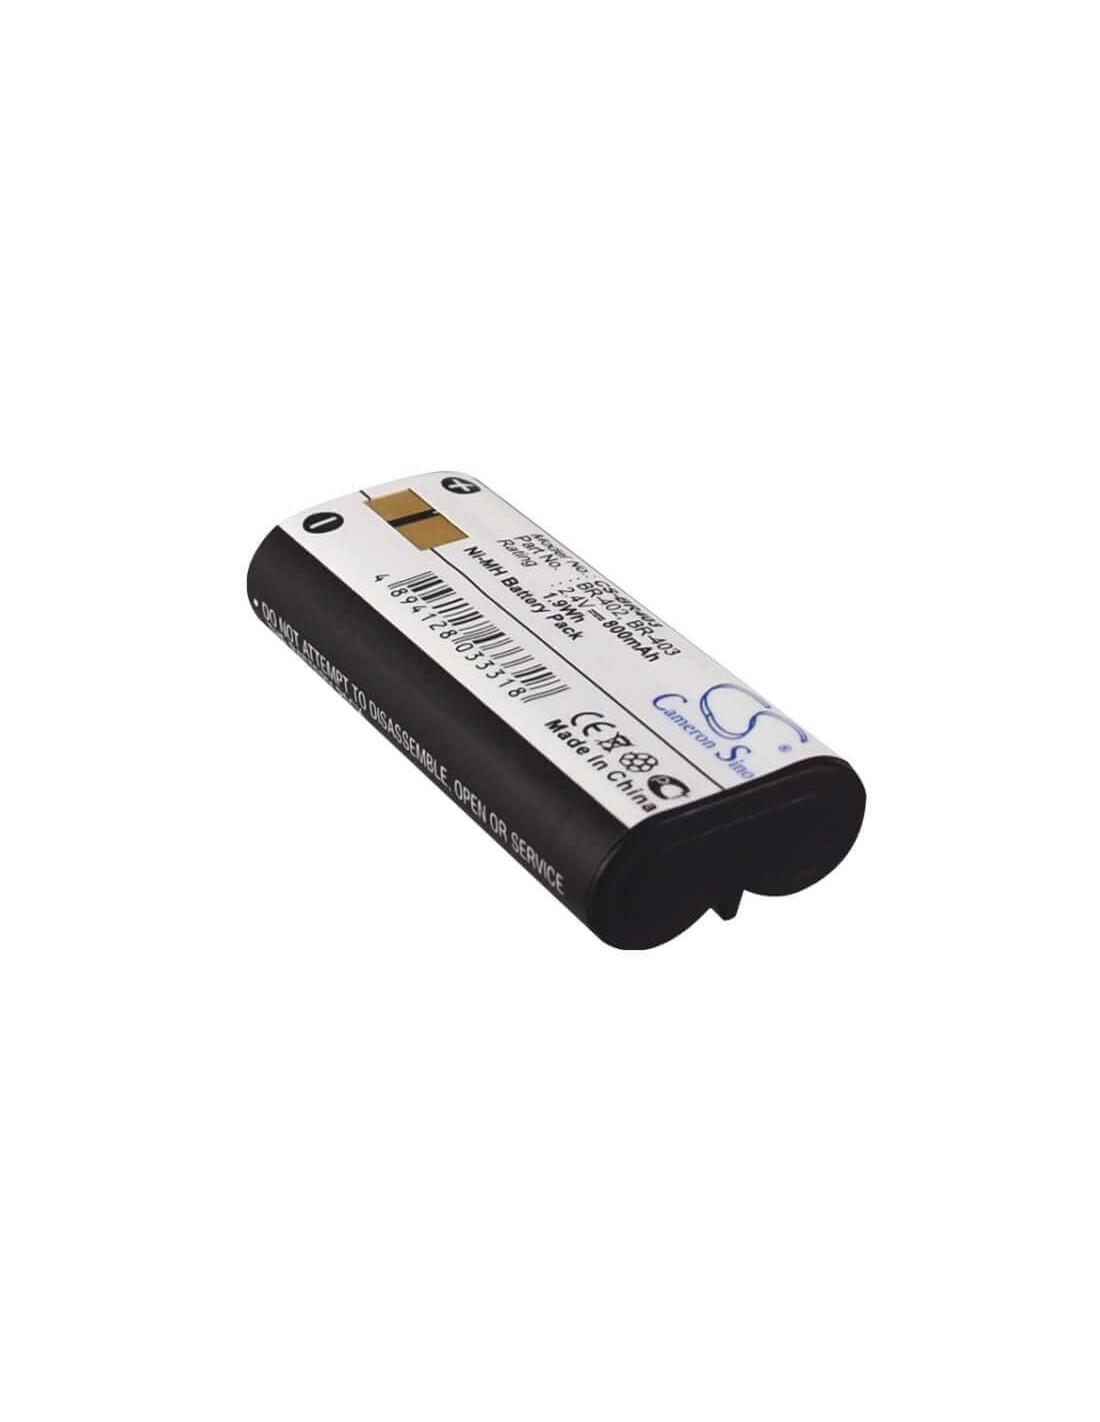 Battery for Olympus Ds-2300, Ds-3300, Ds-4000, Ds-5000, 2.4V, 800mAh - 1.92Wh